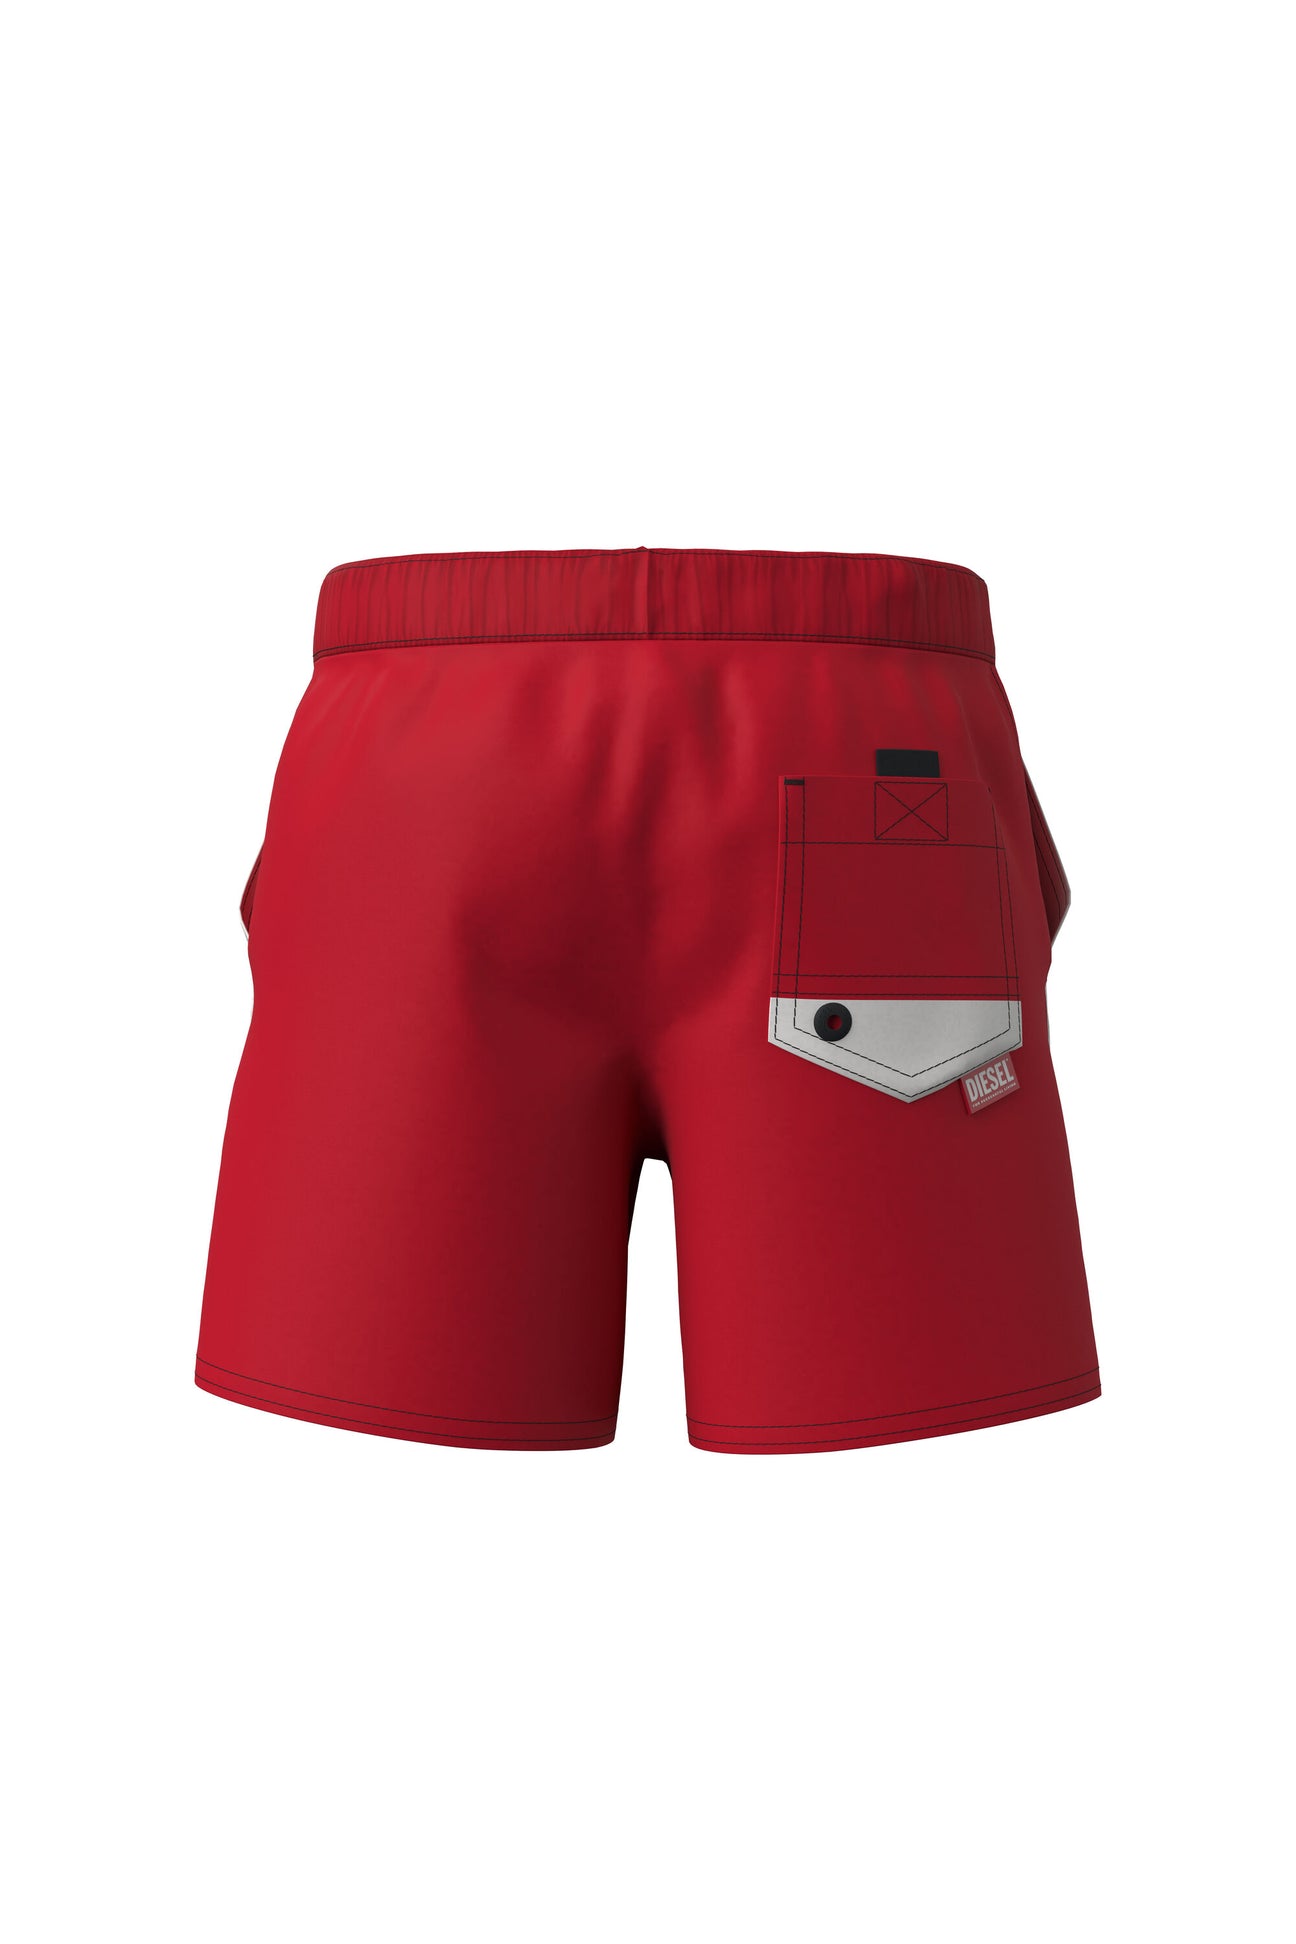 Red boxer shorts with logo and drawstring waistband Red boxer shorts with logo and drawstring waistband